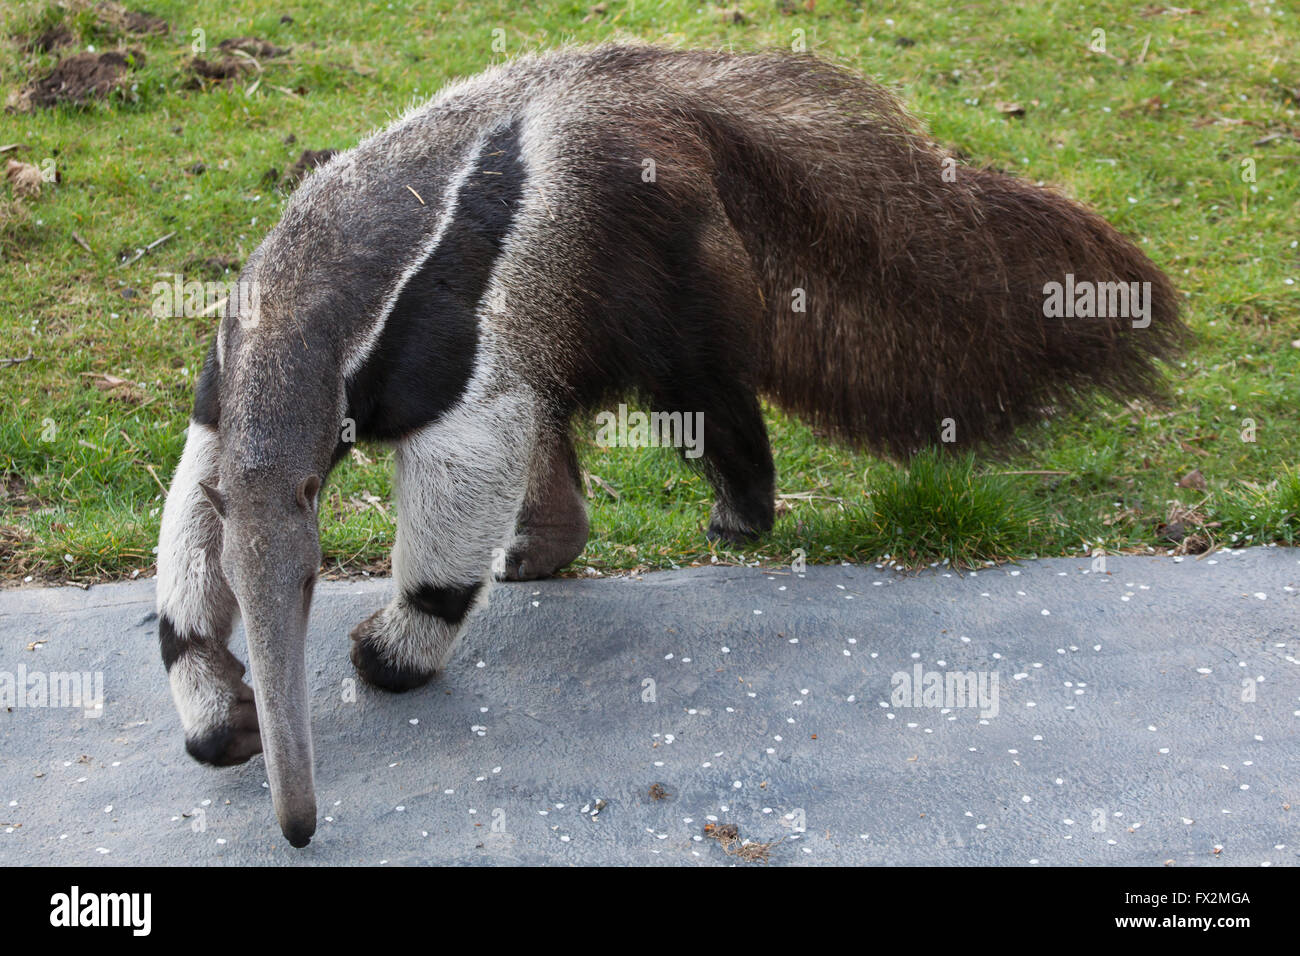 Giant anteater (Myrmecophaga tridactyla), also known as the ant bear at Budapest Zoo in Budapest, Hungary. Stock Photo